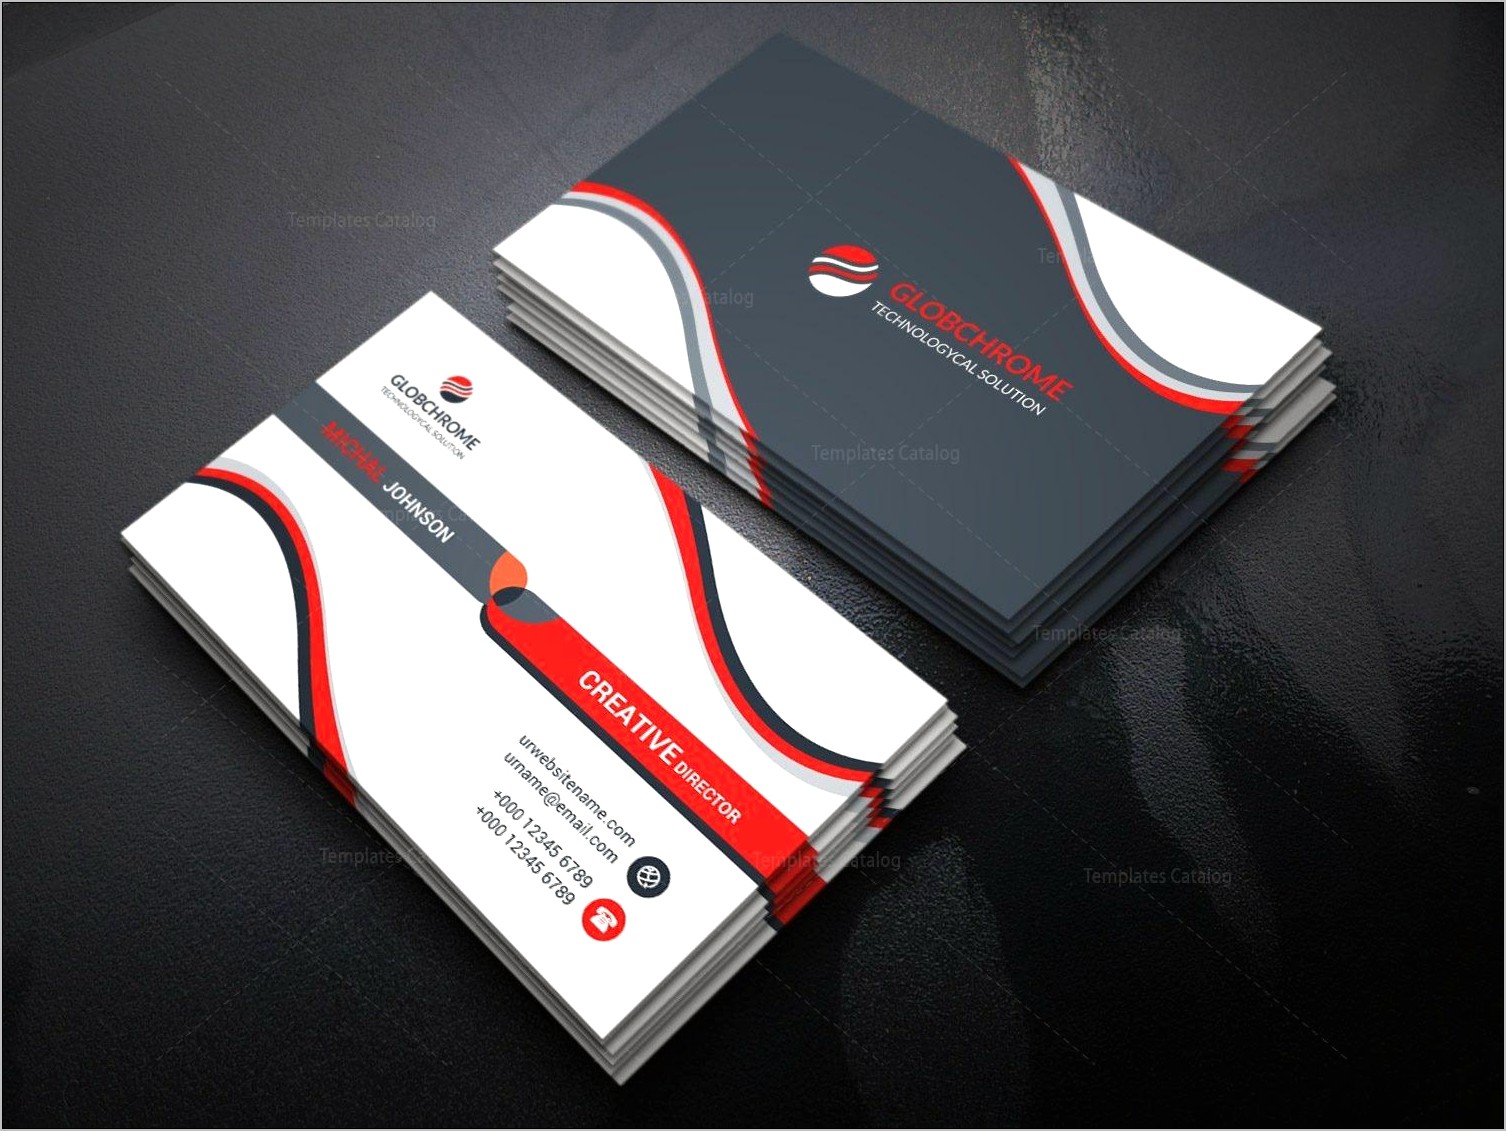 Agriculture Business Card Templates Free Download